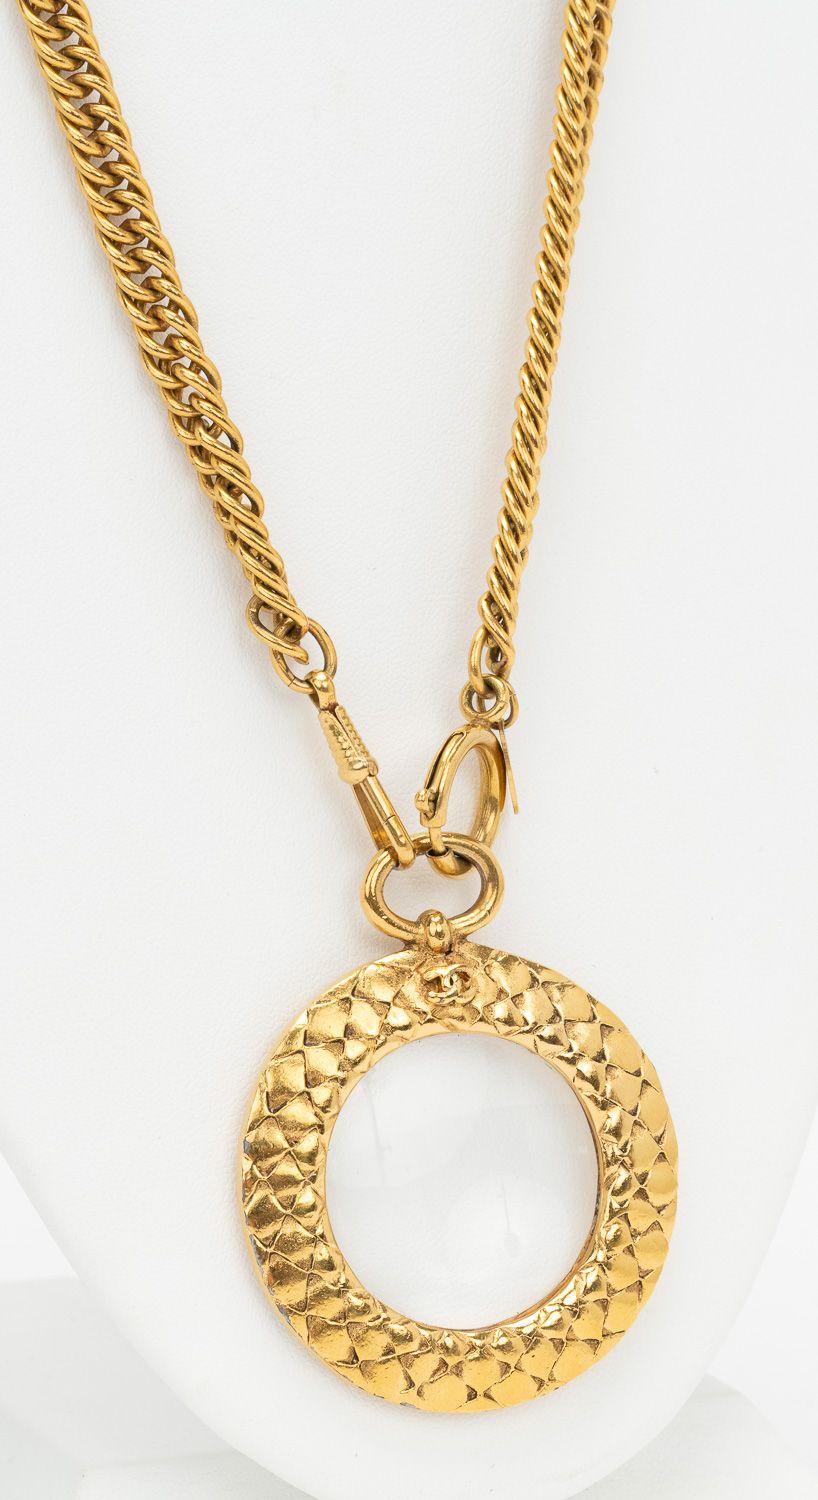 Women's Chanel 80s Scales Textured Magnifier Necklace